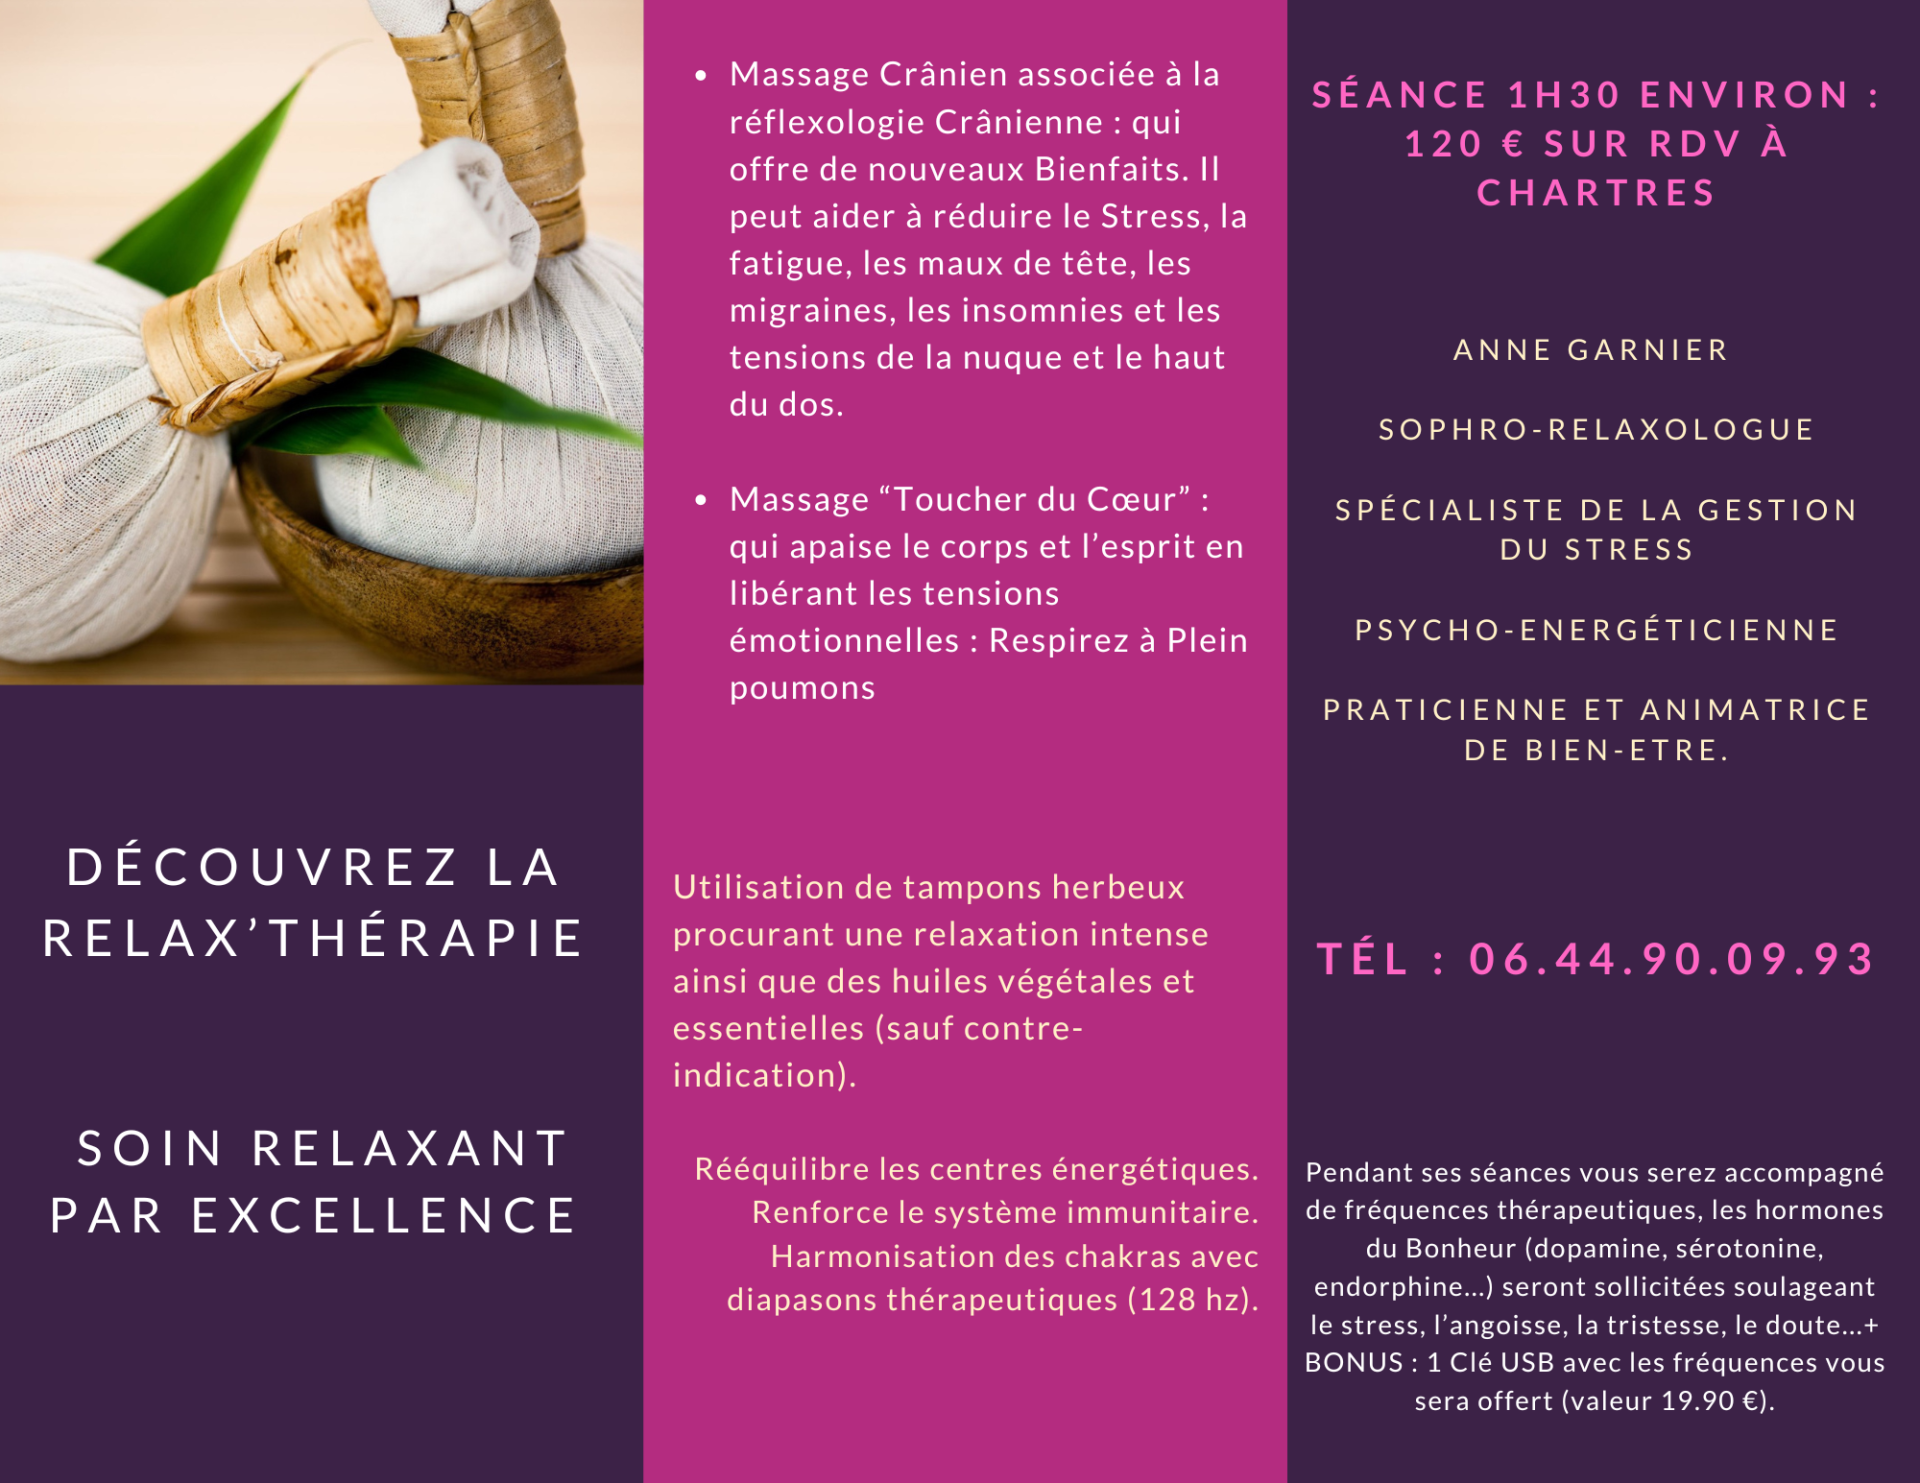 Massage spa trifold brochure in lavender photocentric style 3